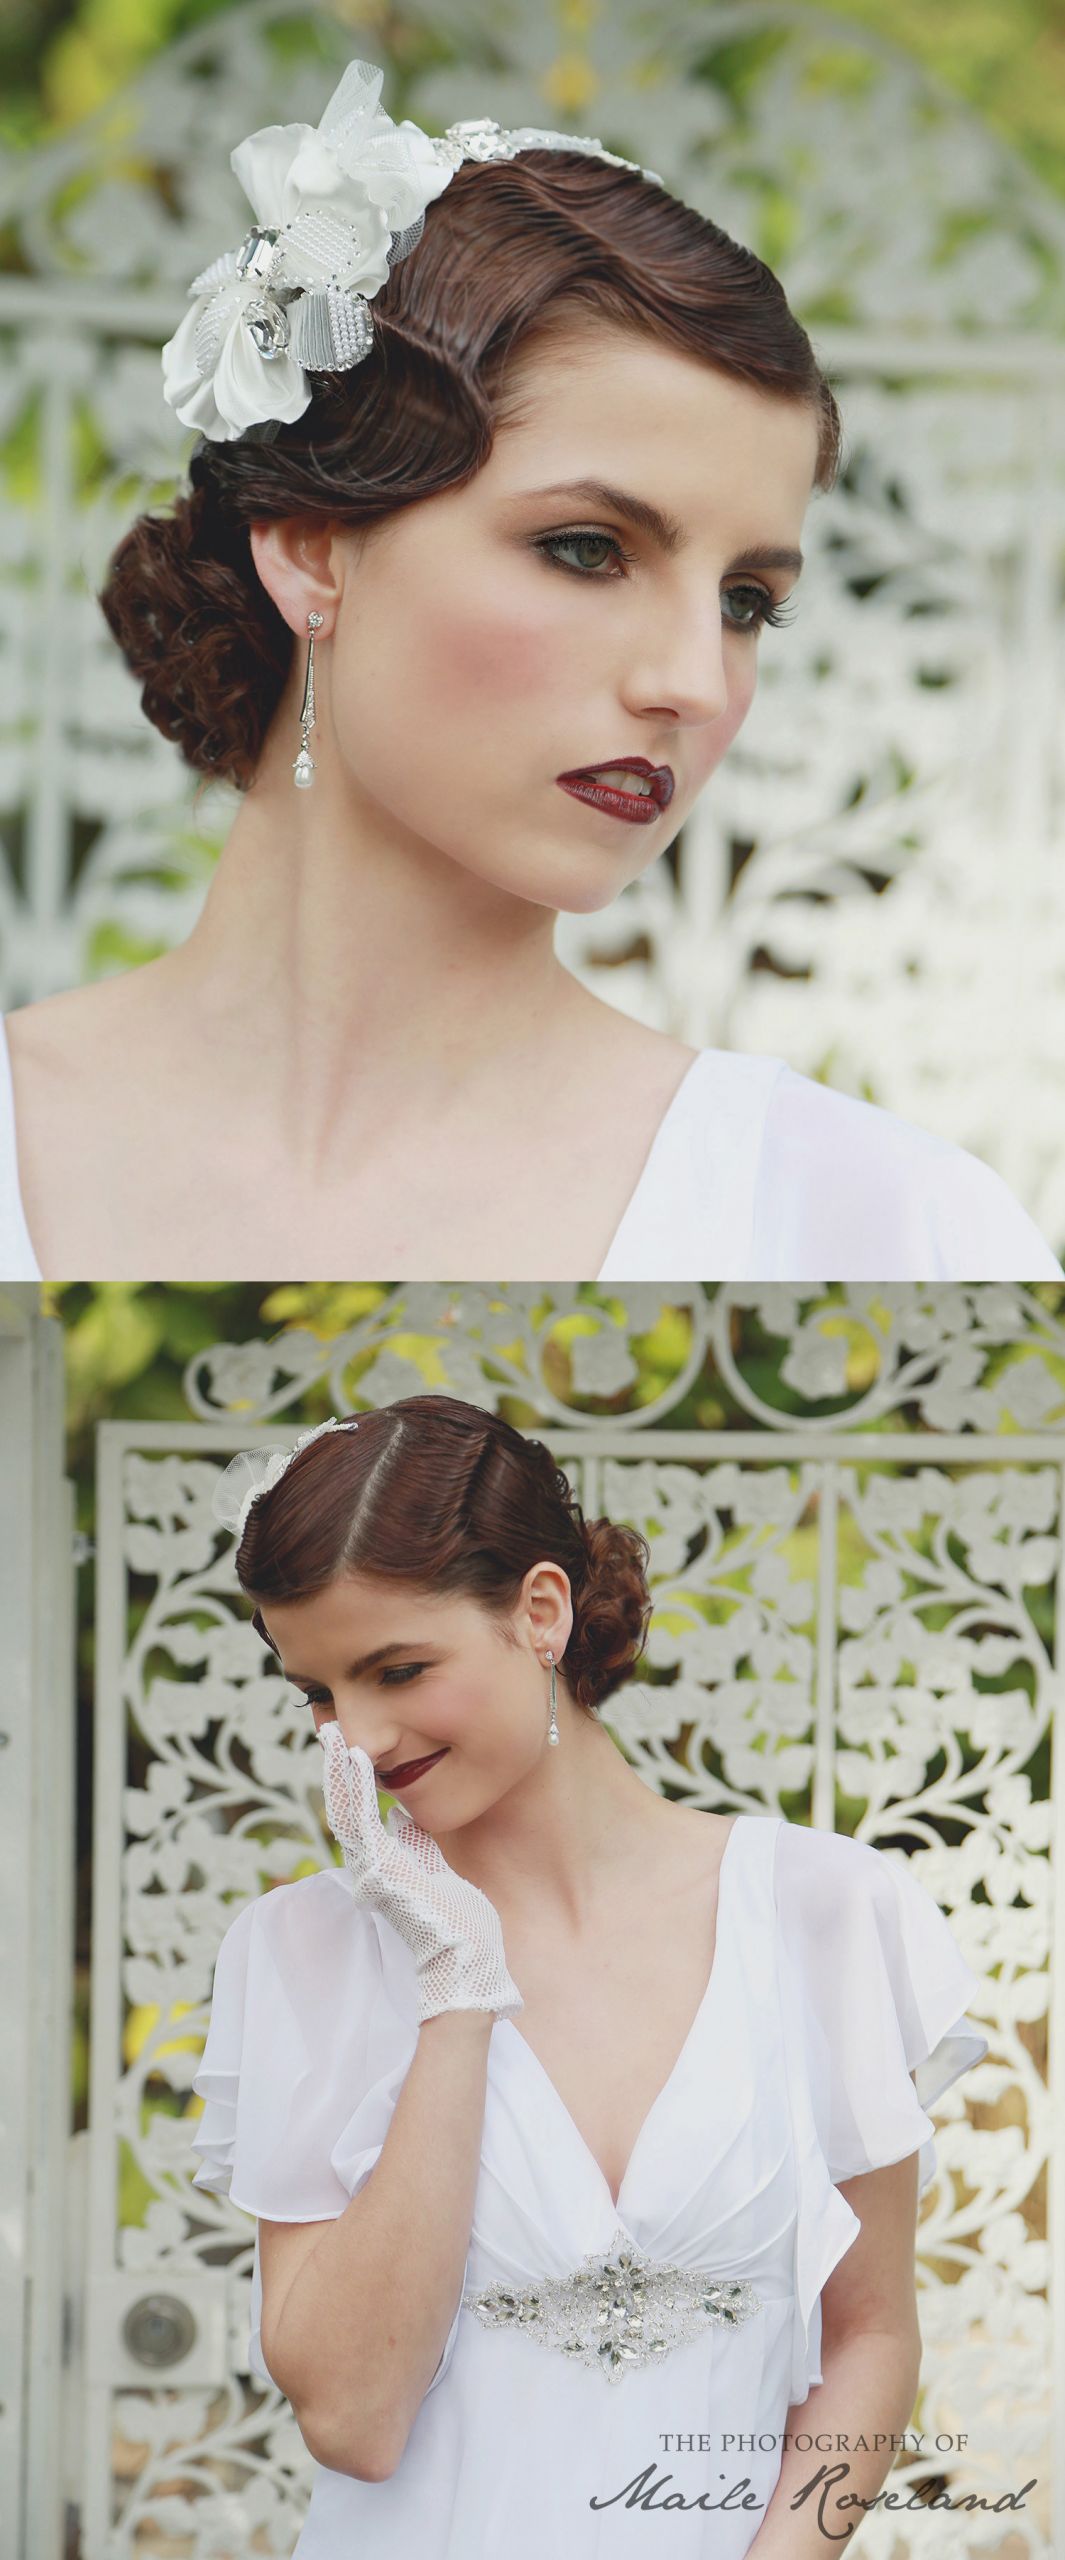 1920 Wedding Hairstyles
 1920s hair and makeup